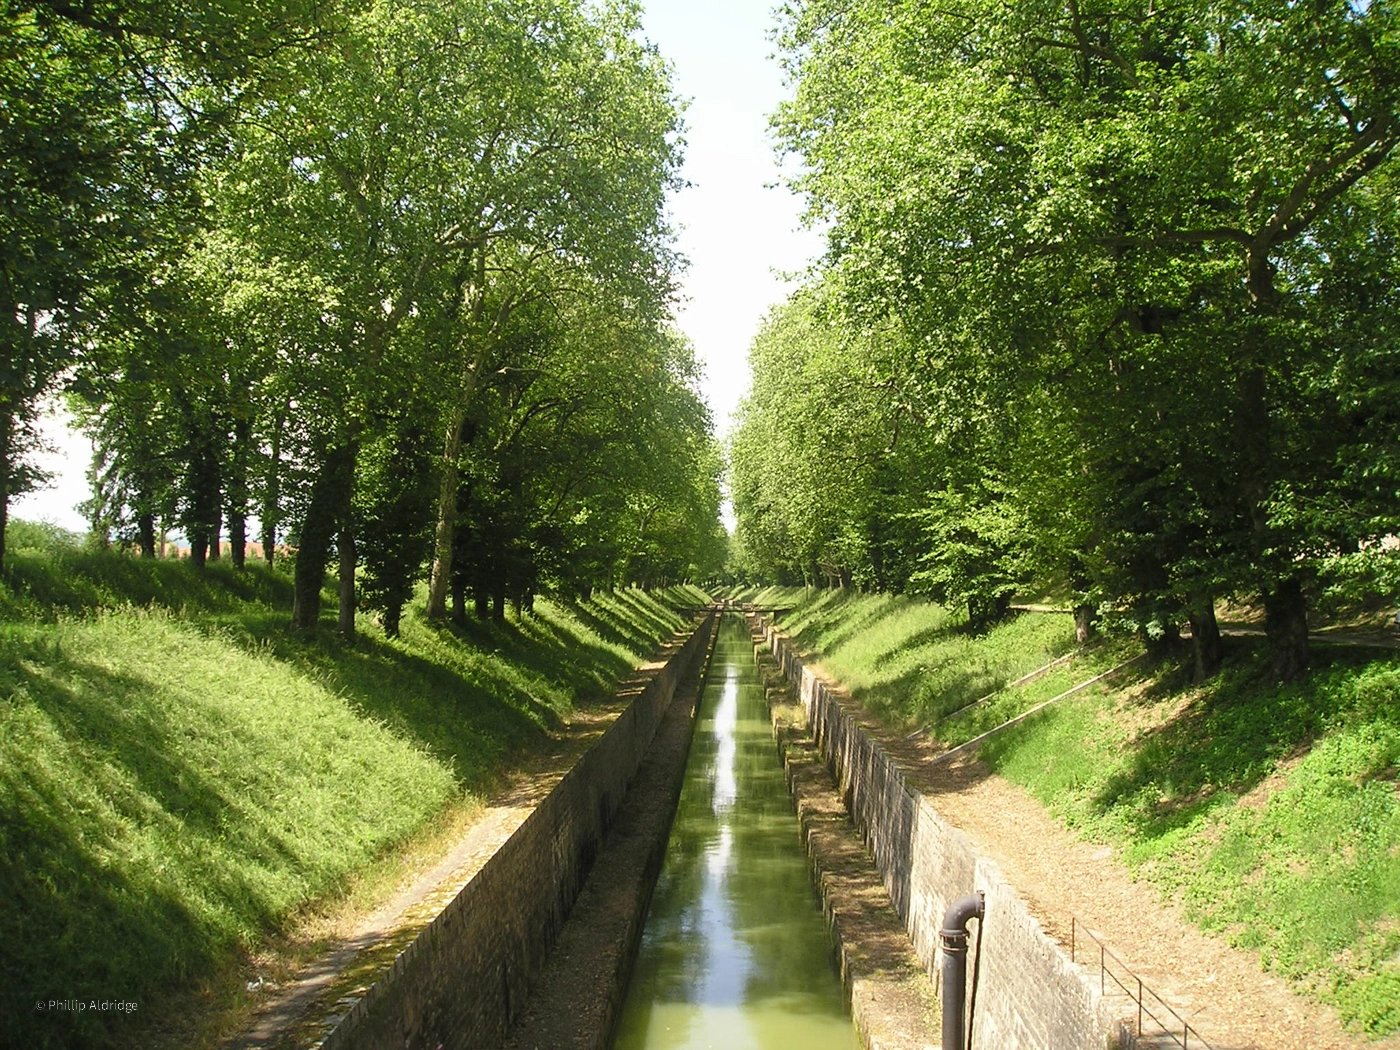 The tunnel embankment and approach at Pouilly en Auxois